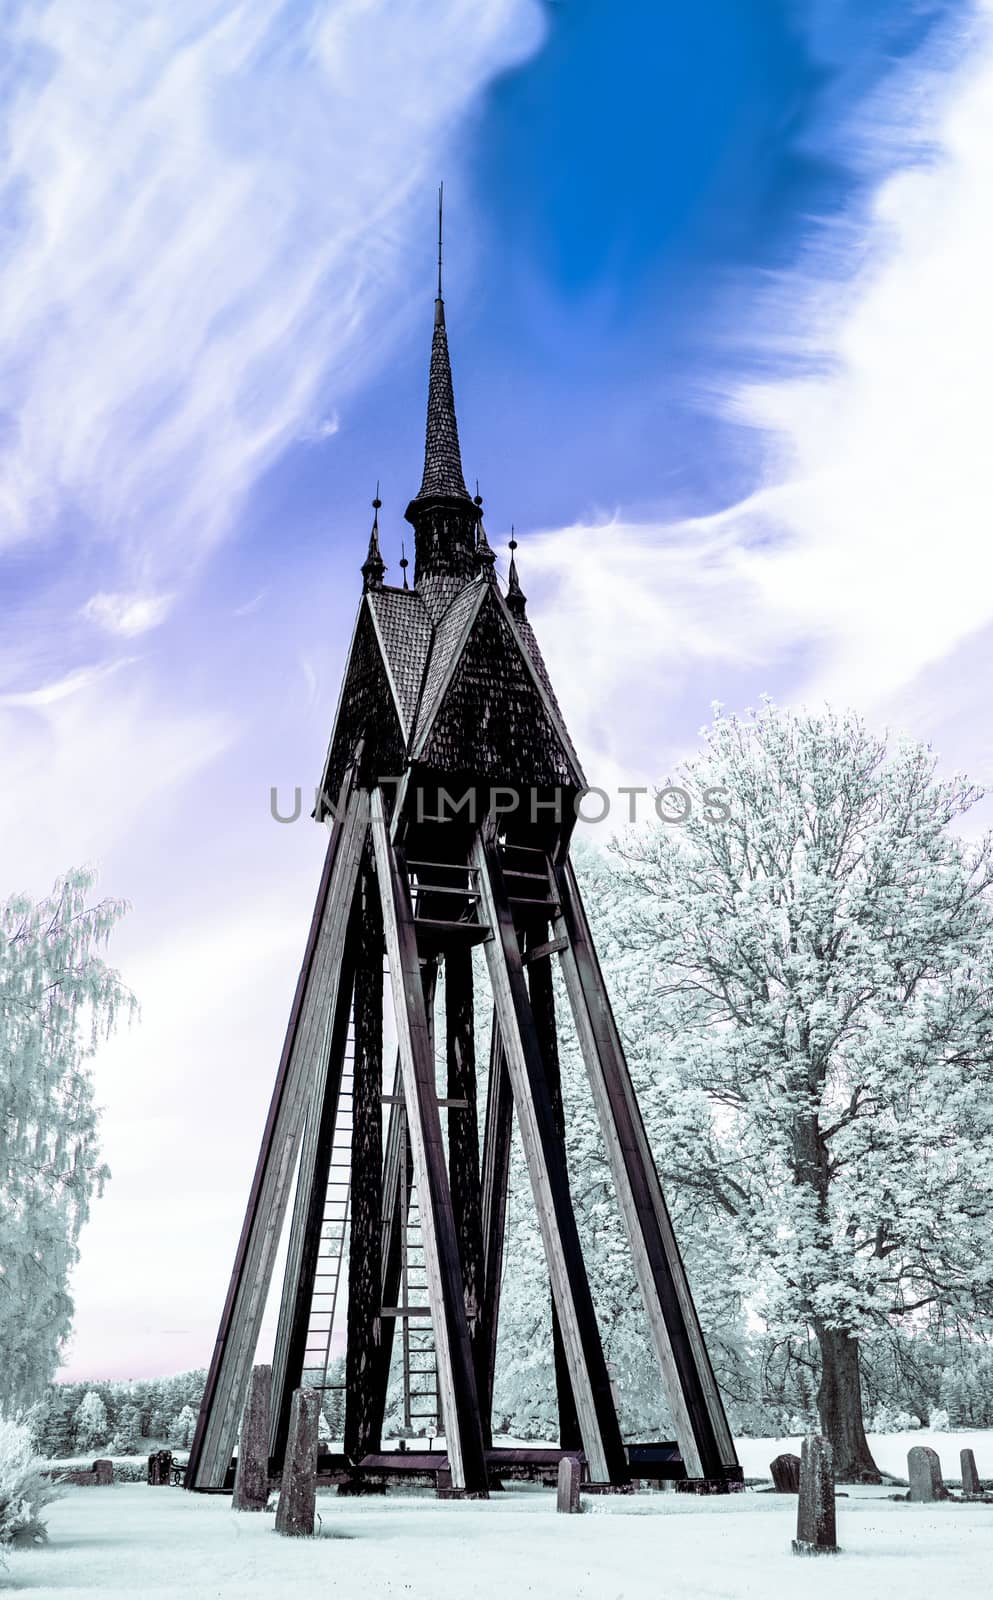 Old bell tower by thomas_males